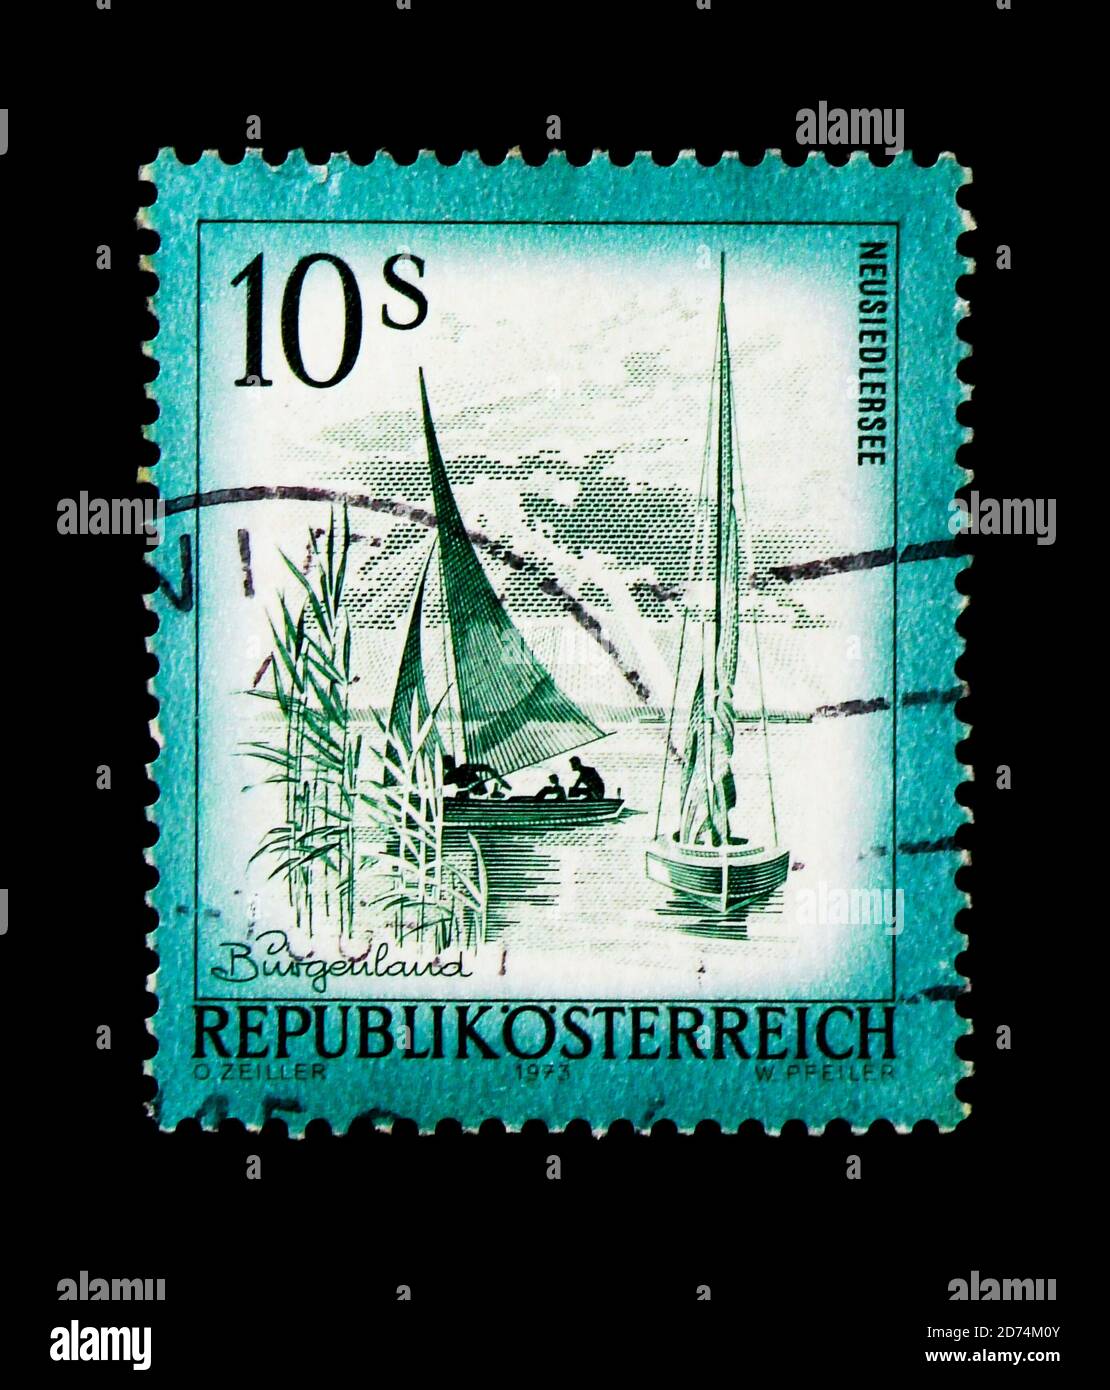 MOSCOW, RUSSIA - NOVEMBER 24, 2017: A stamp printed in shows Neusiedlersee, Burgenland, Beautiful Austria serie, circa 1973 Stock Photo